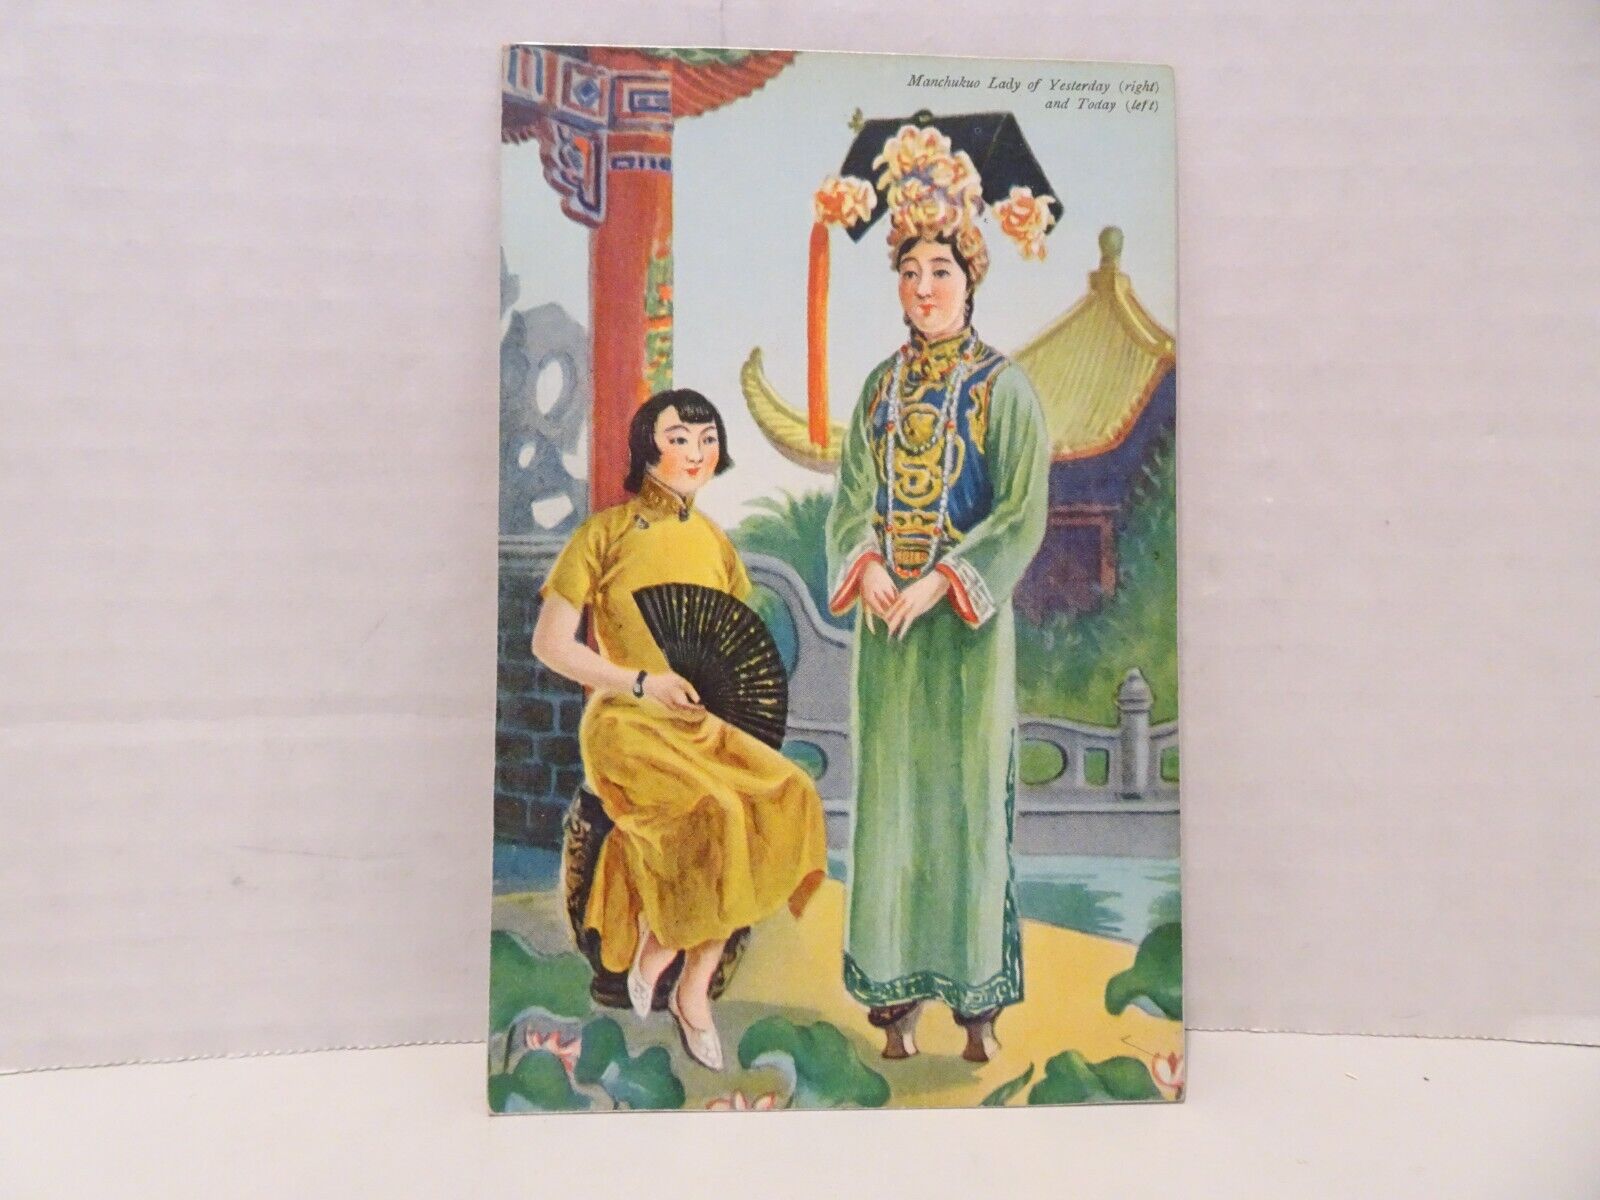 Vintage Postcard Manchukuo Lady of Yesterday and Today Travel Native Dress